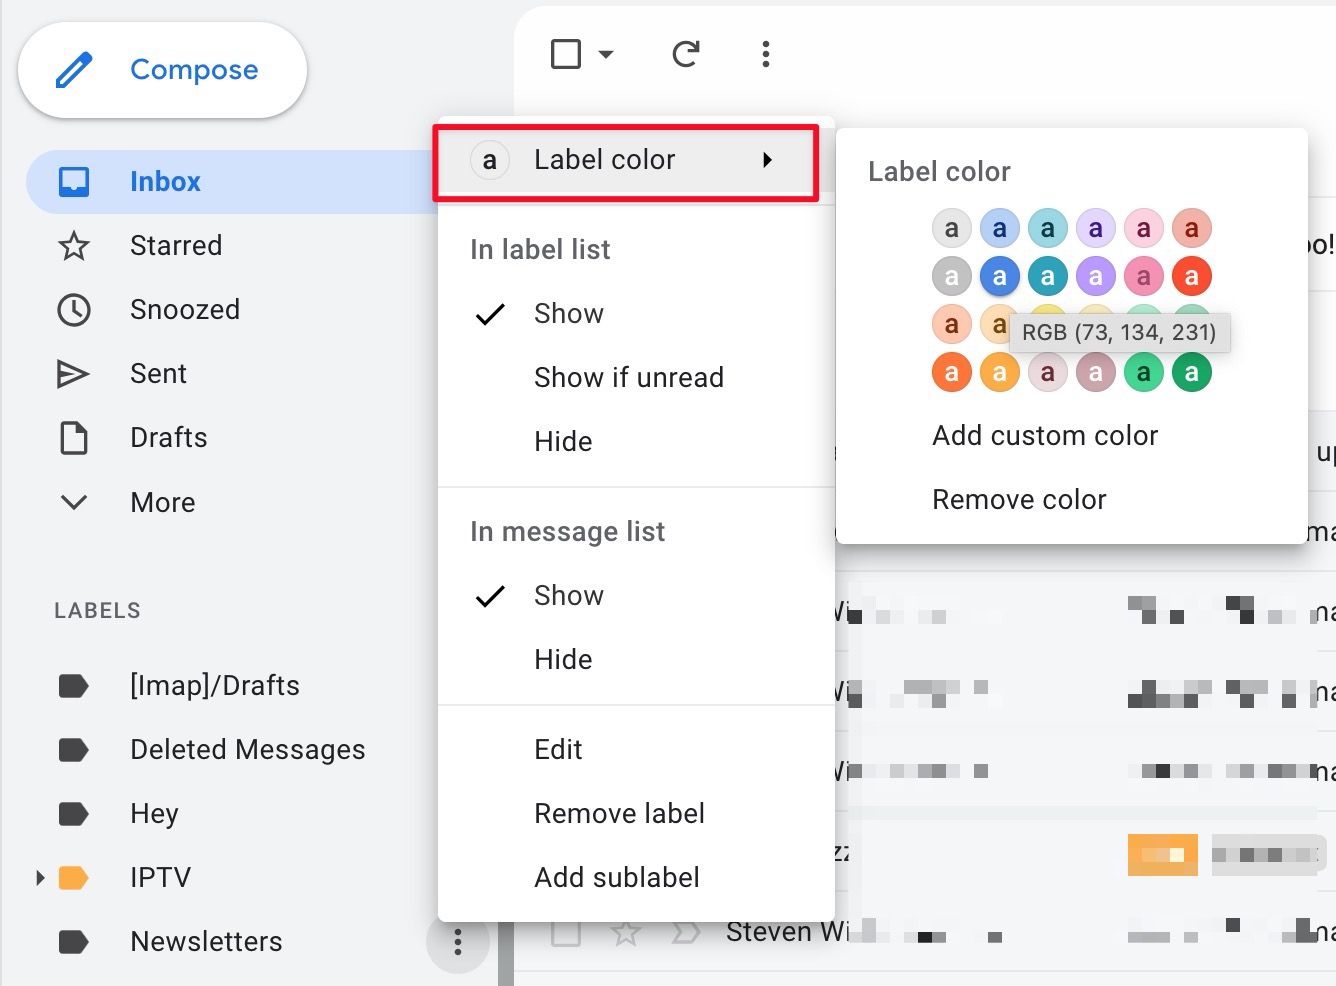 Add a color to a label to color-code labels for quick reference